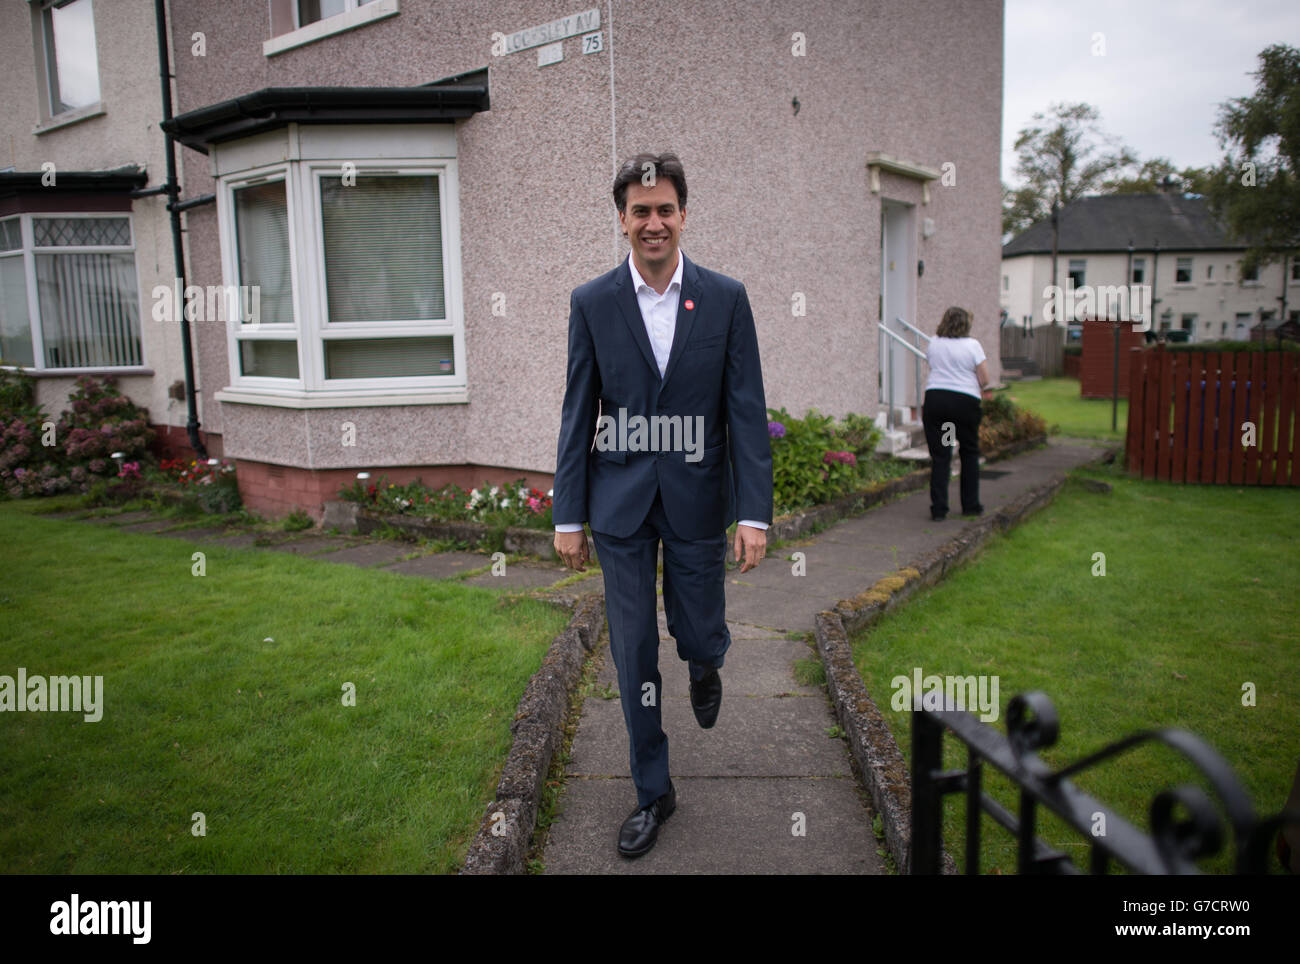 Labour leader Ed Miliband canvasses voters in the Knightswood area of Glasgow during a historic day for Scotland as voters determine whether the country should remain part of the United Kingdom. Stock Photo